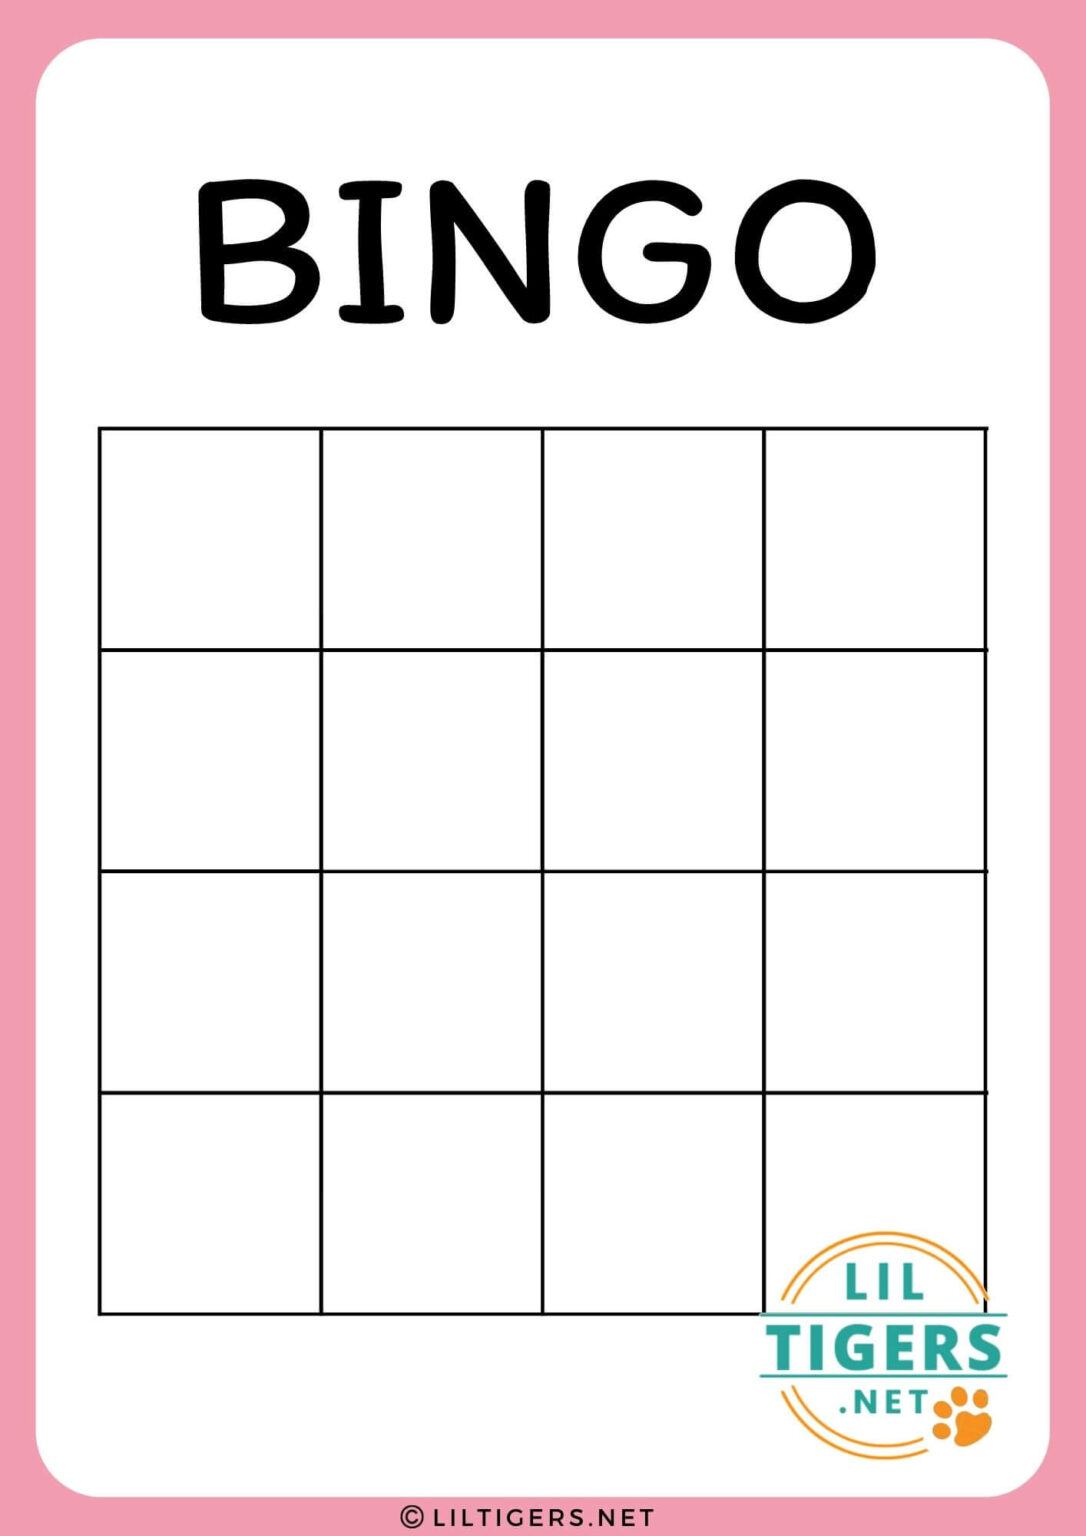 Free Printable Mother's Day Bingo Game Templates - Lil Tigers